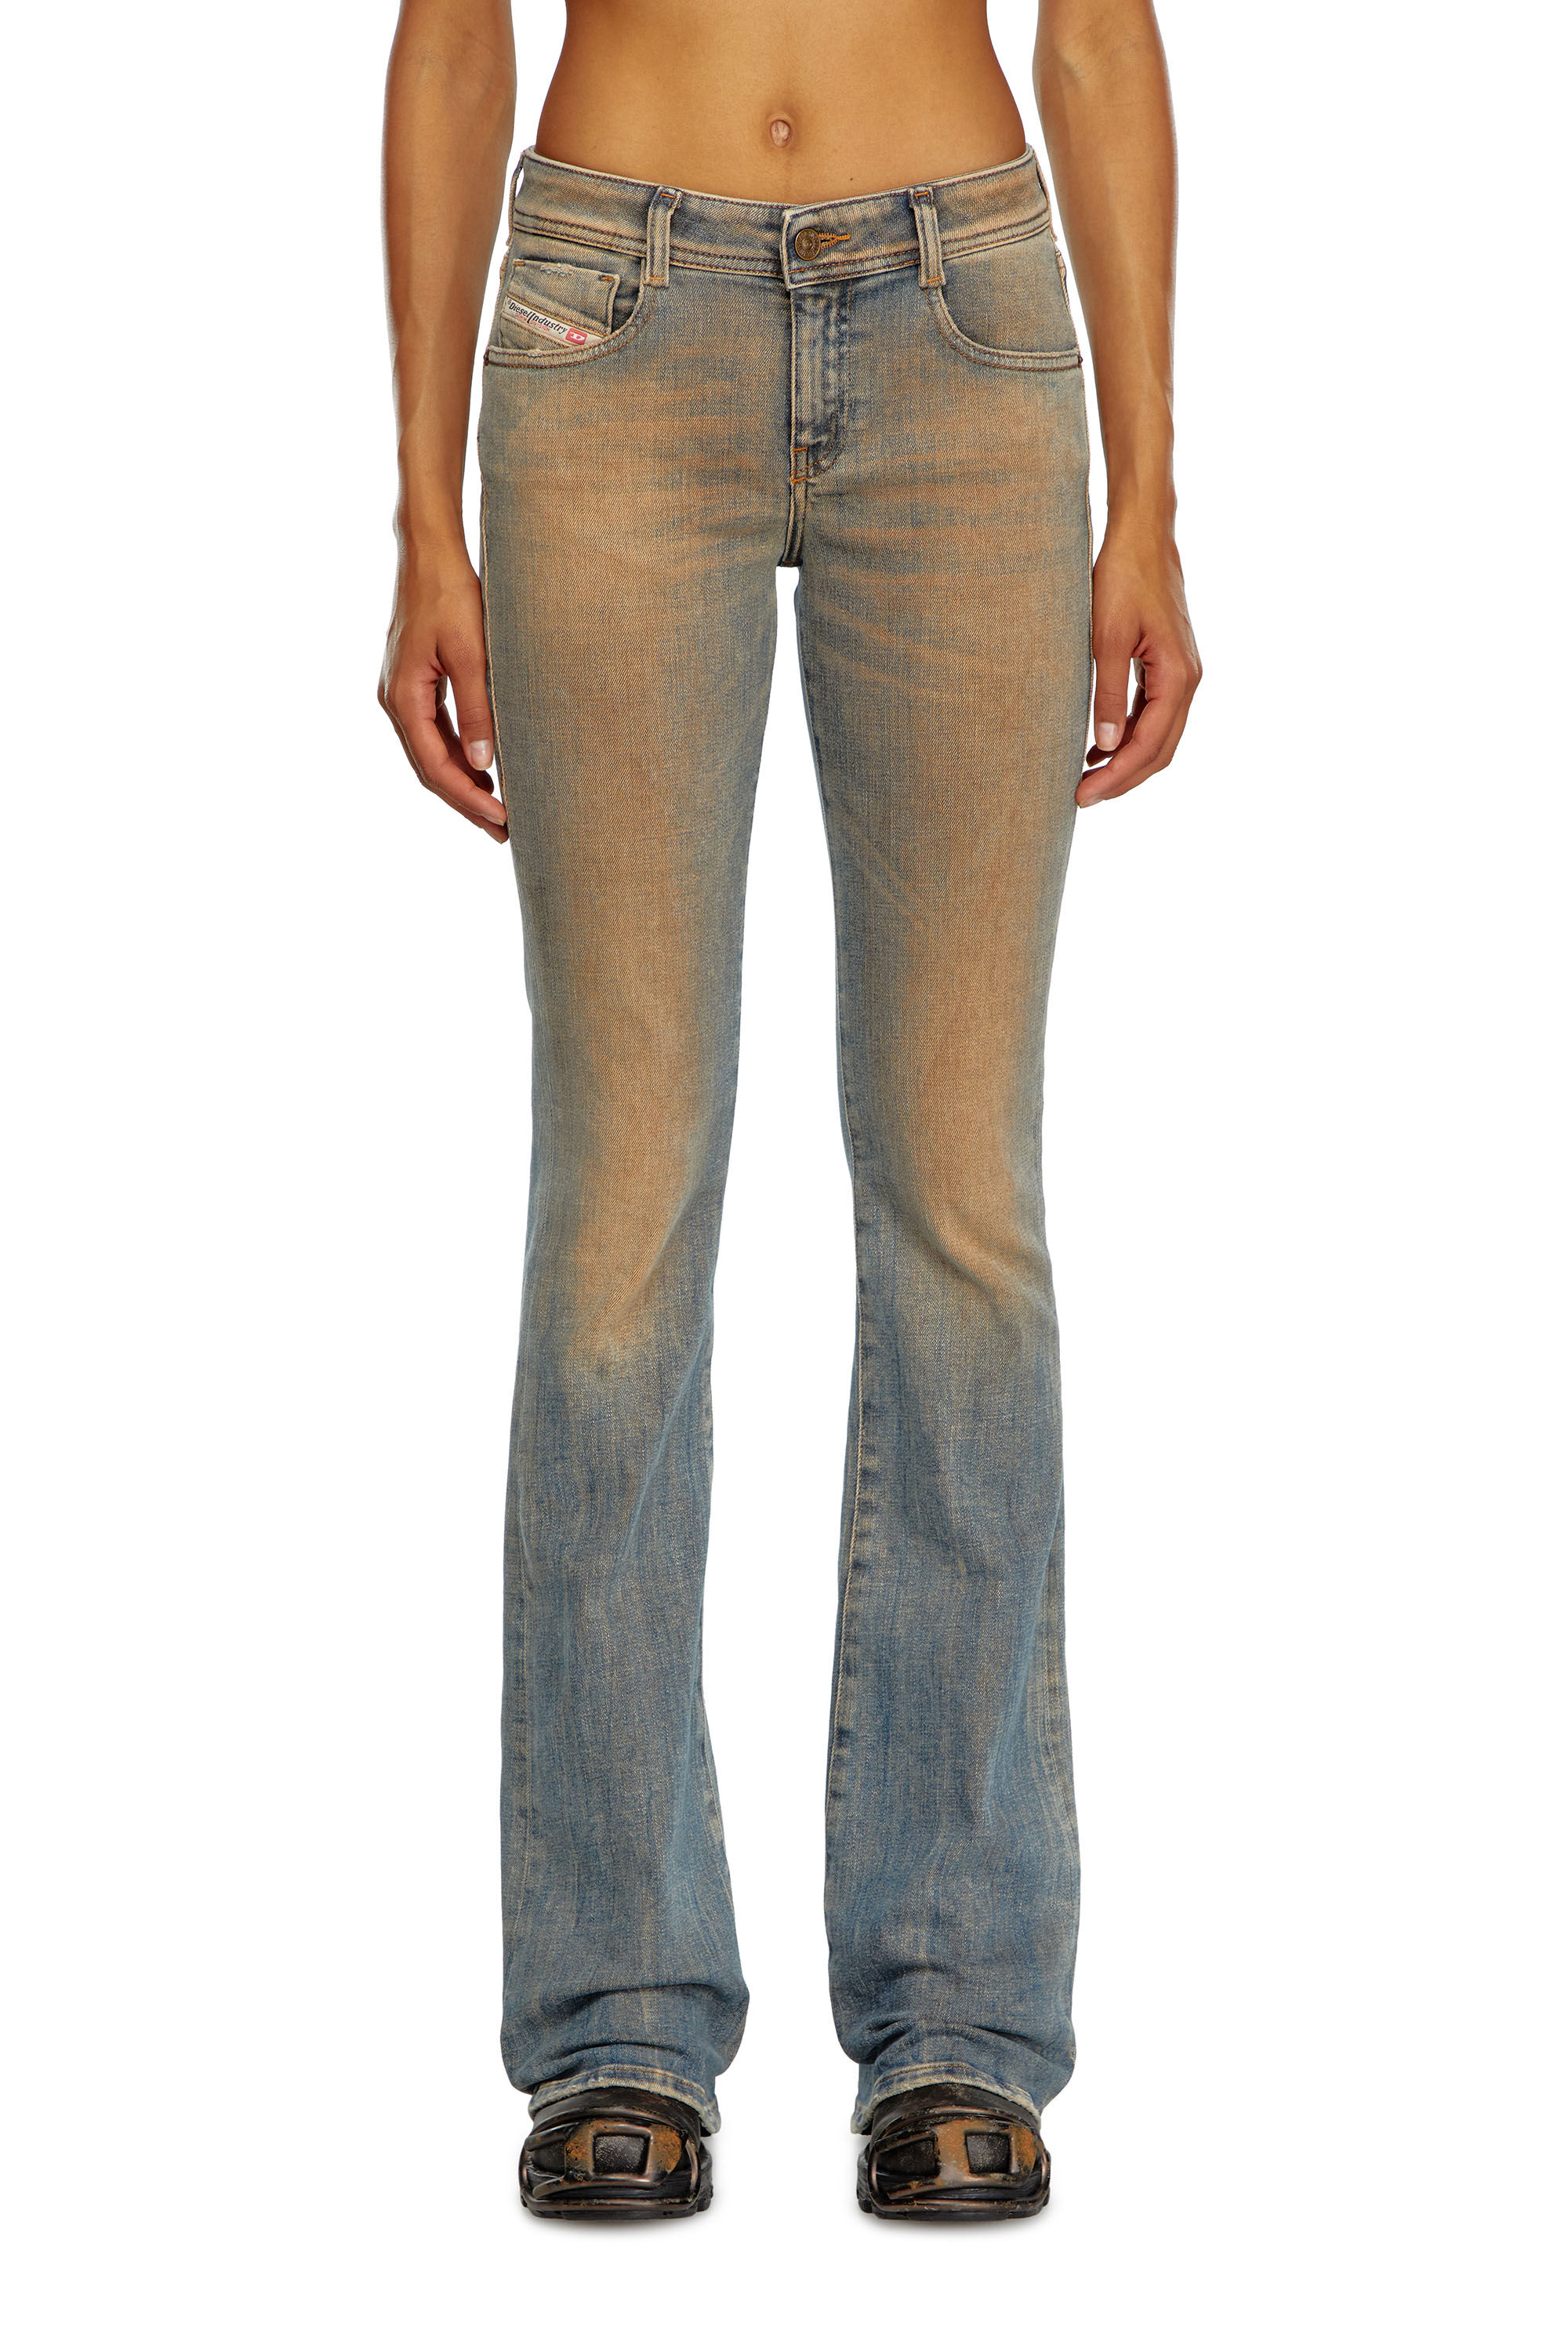 Diesel - Bootcut and Flare Jeans 1969 D-Ebbey 09J23, Mujer Bootcut y Flare Jeans - 1969 D-Ebbey in Azul marino - Image 3